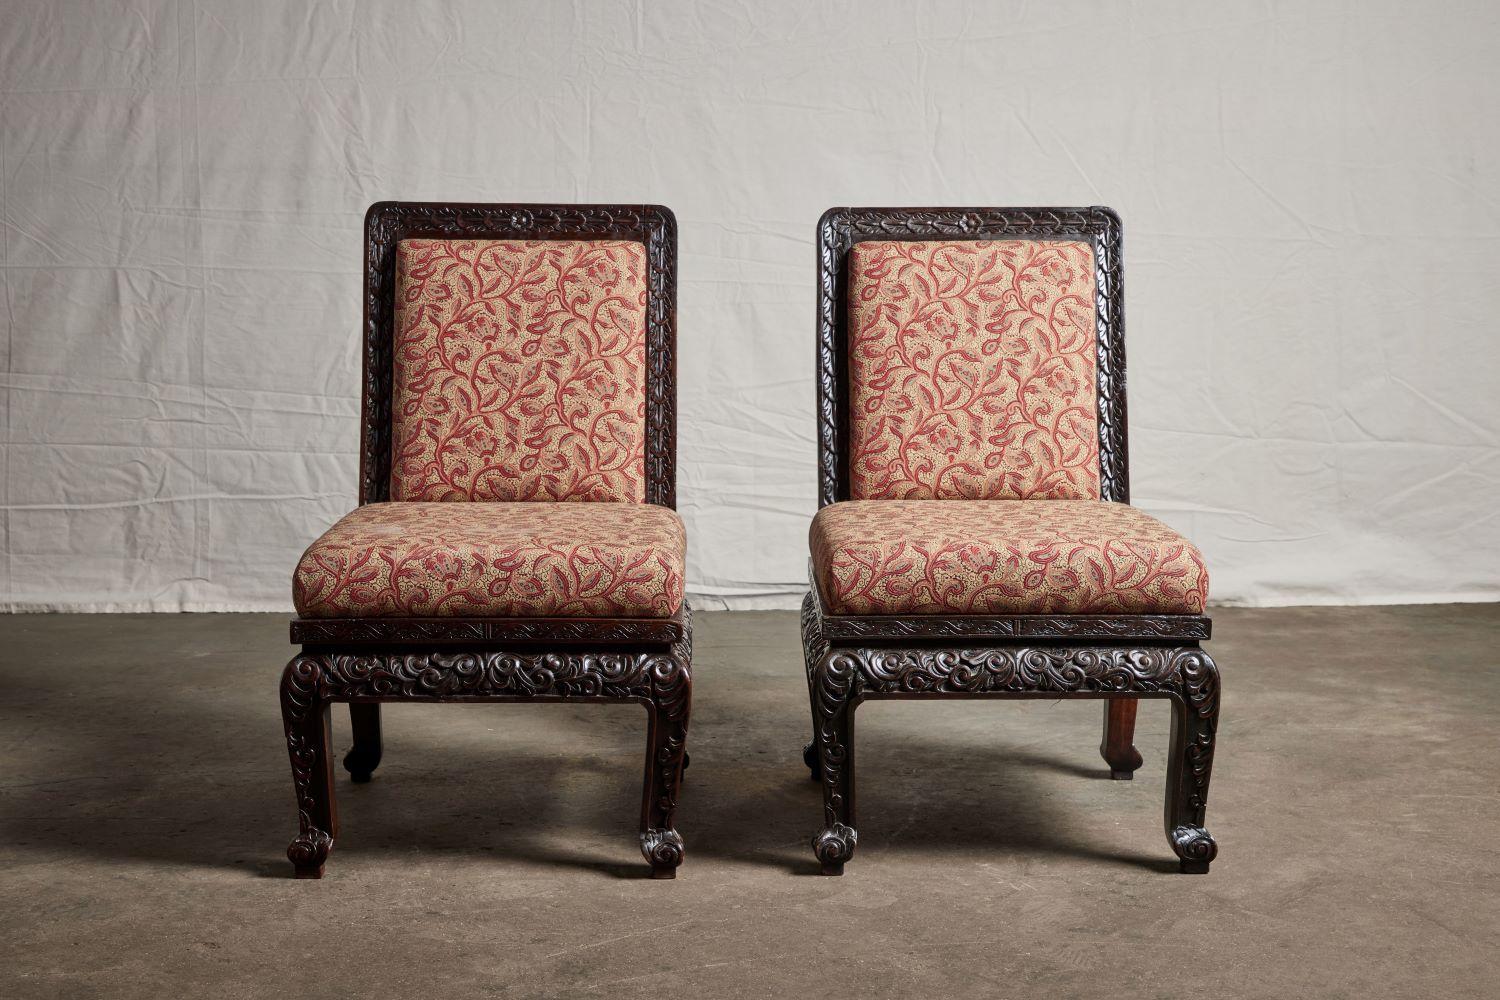 Pair of highly carved Asian slipper chairs from 1900.